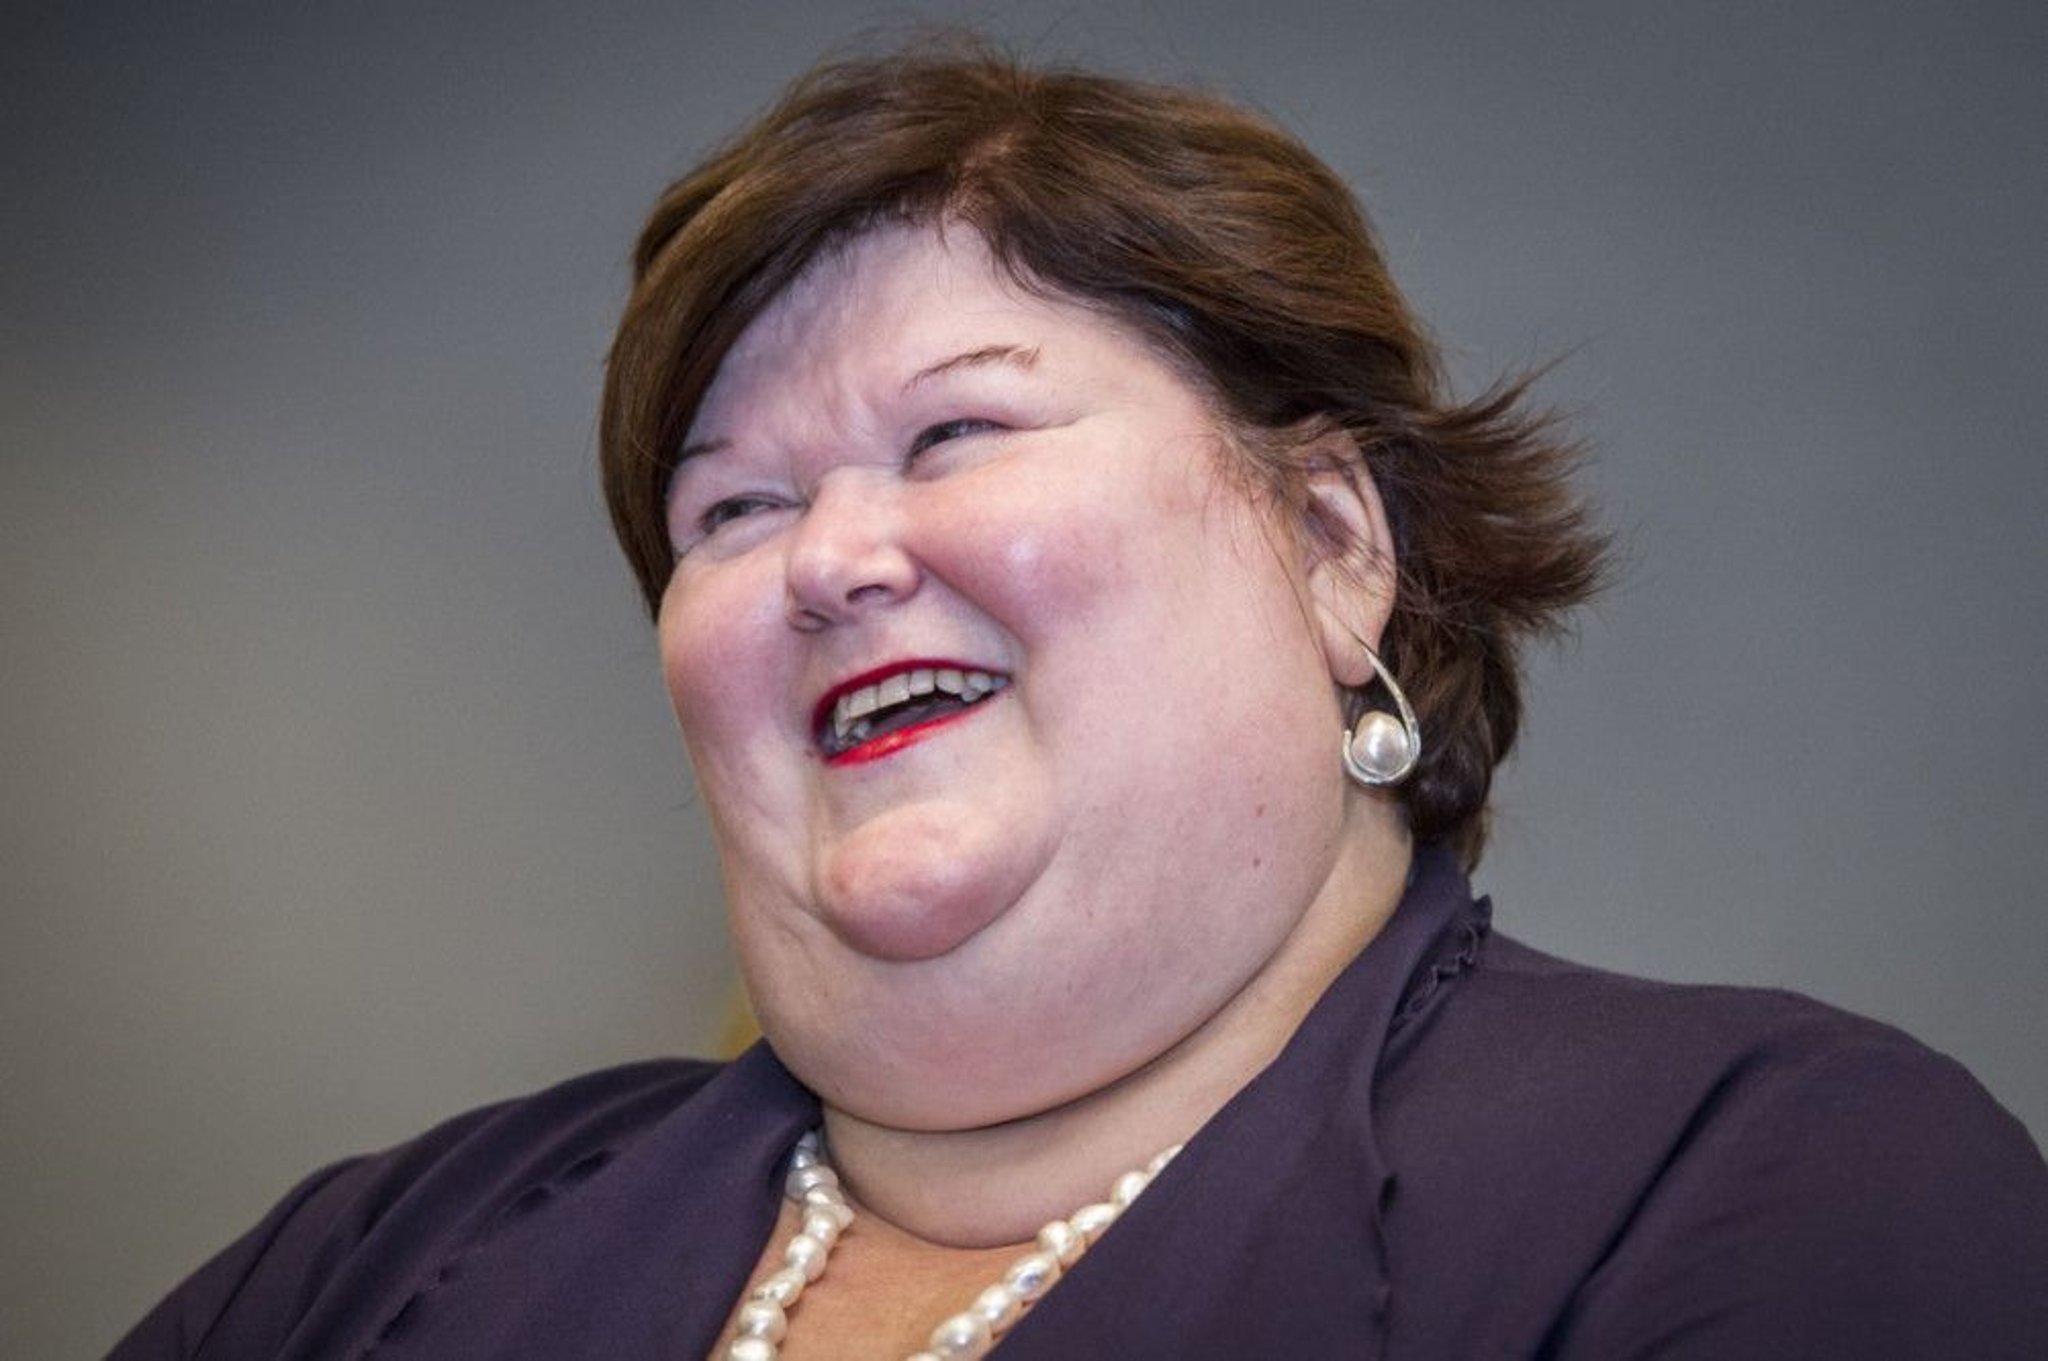 High Quality Minister Of Health Belgium - Patetic Blank Meme Template